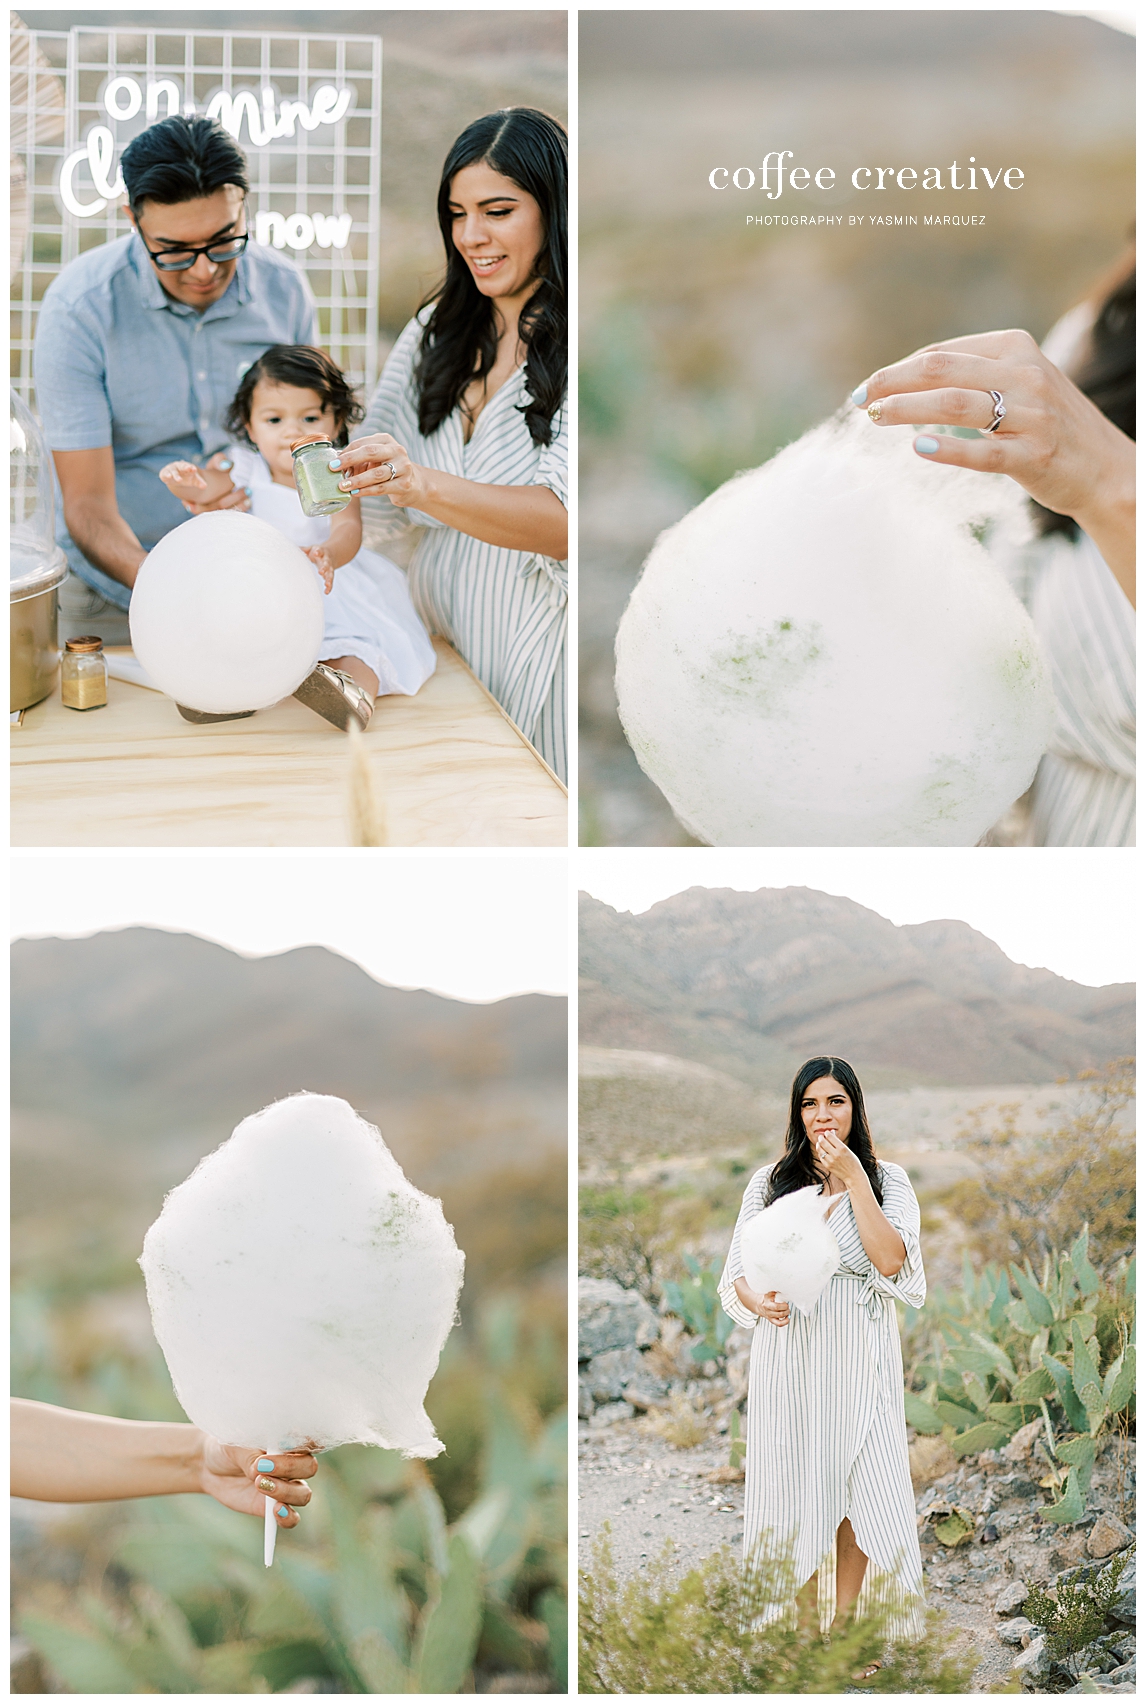 Cloud Nine, Brand Photography for Small Businesses, el paso photography